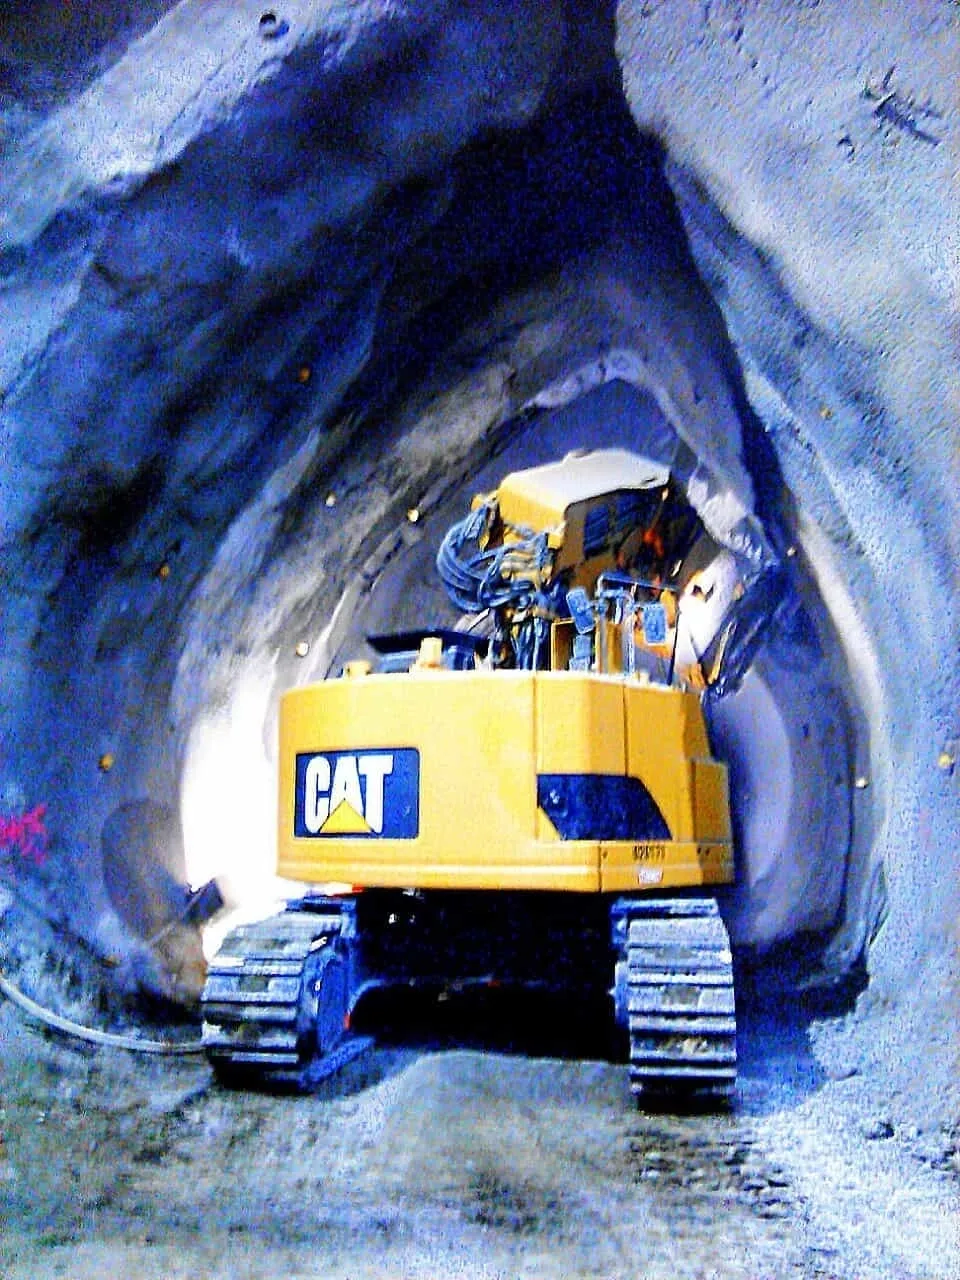 A yellow cat tractor in the middle of an underground tunnel.